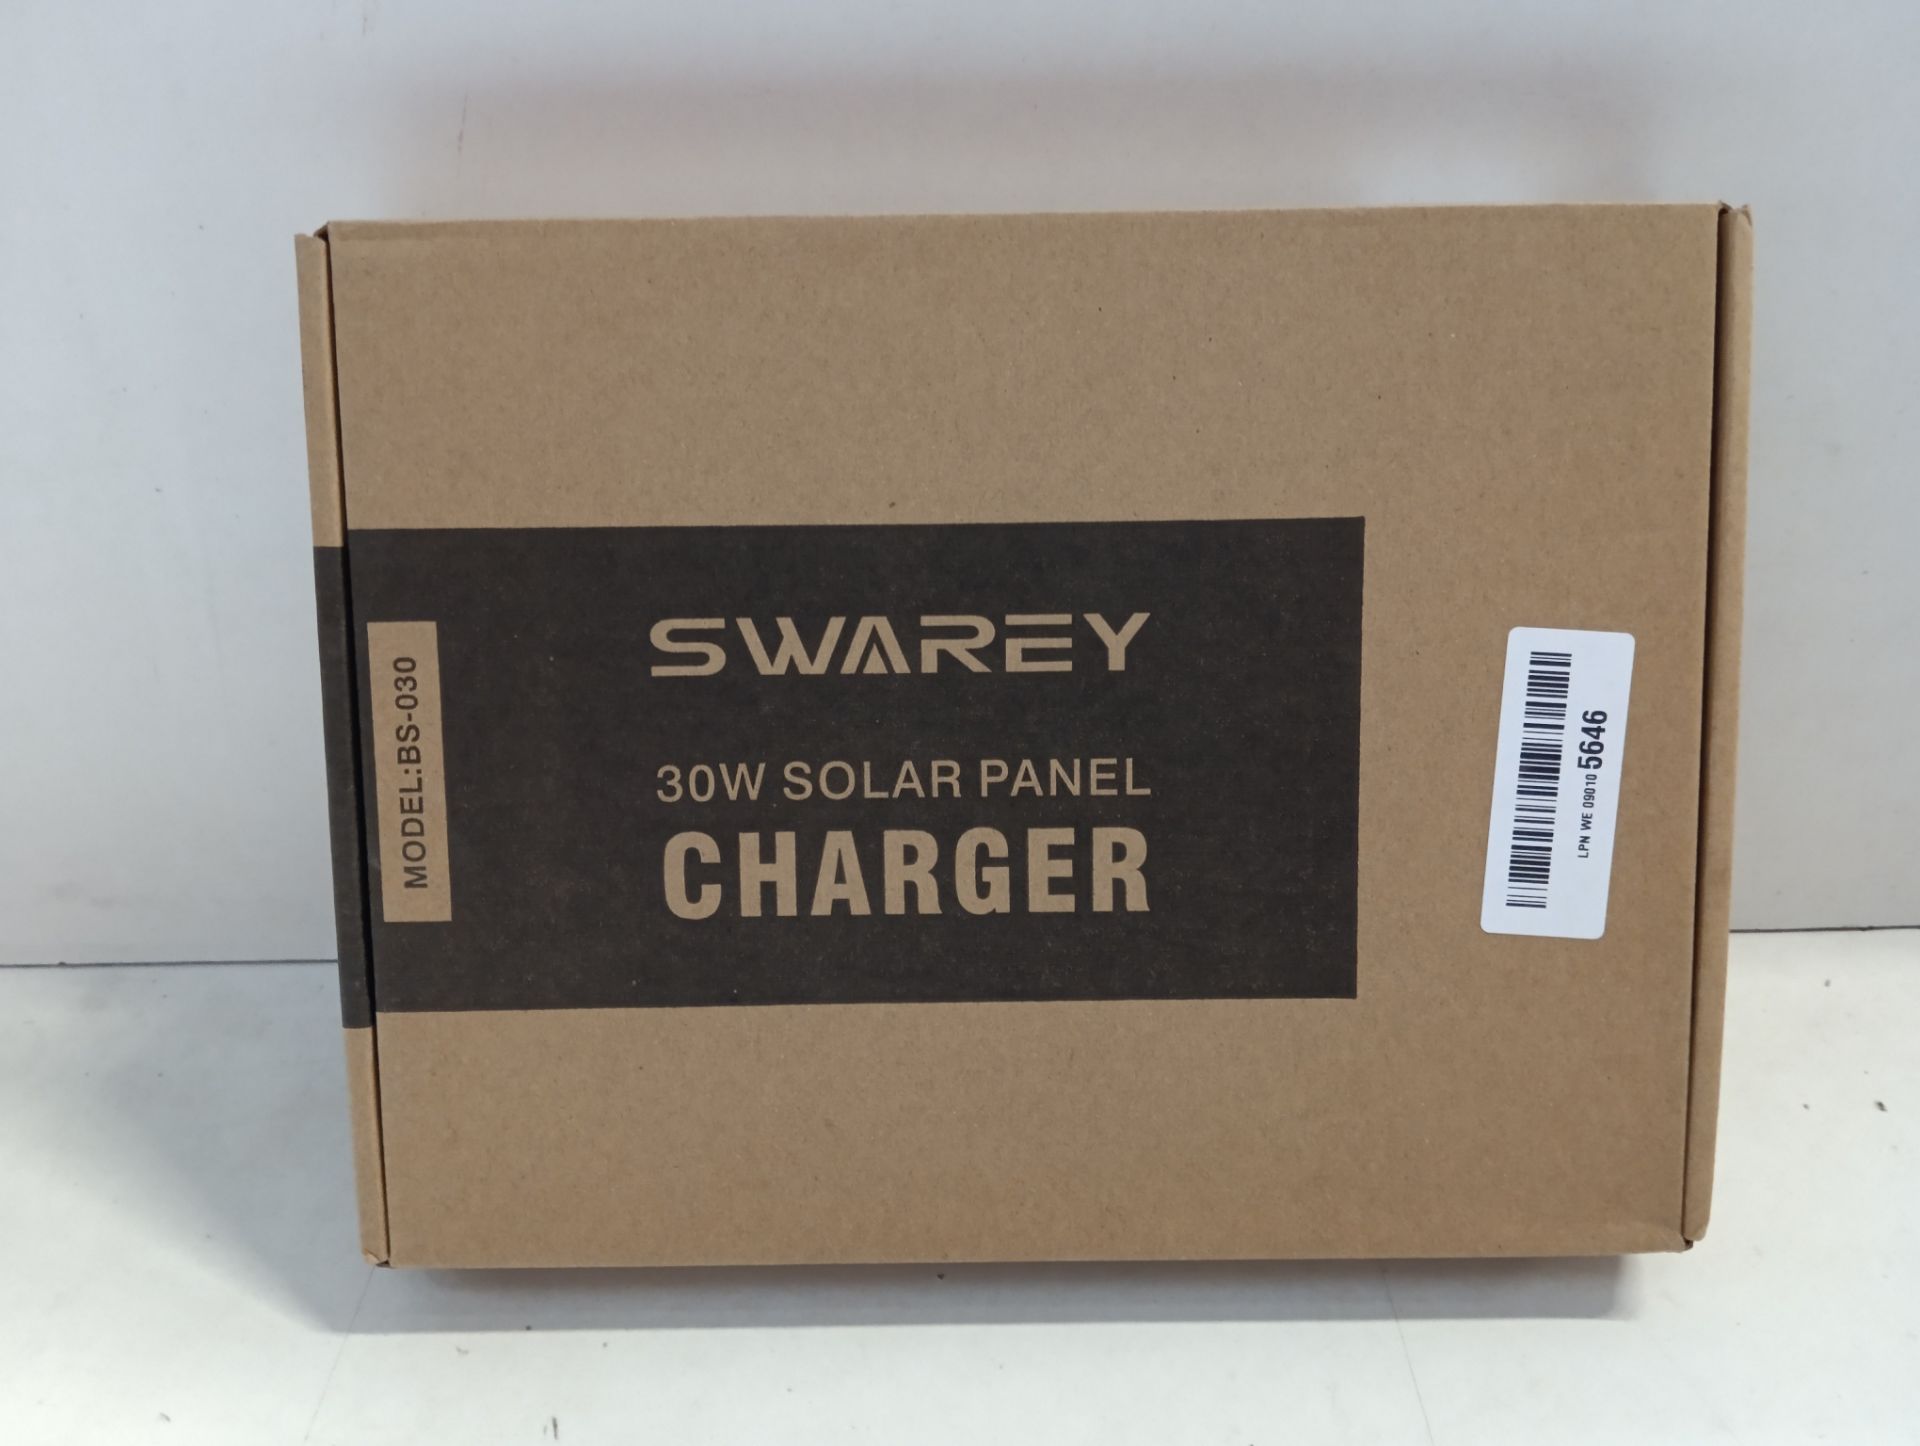 RRP £73.69 SWAREY Solar Charger 30W ETFE Solar Panel Foldable - Image 2 of 2